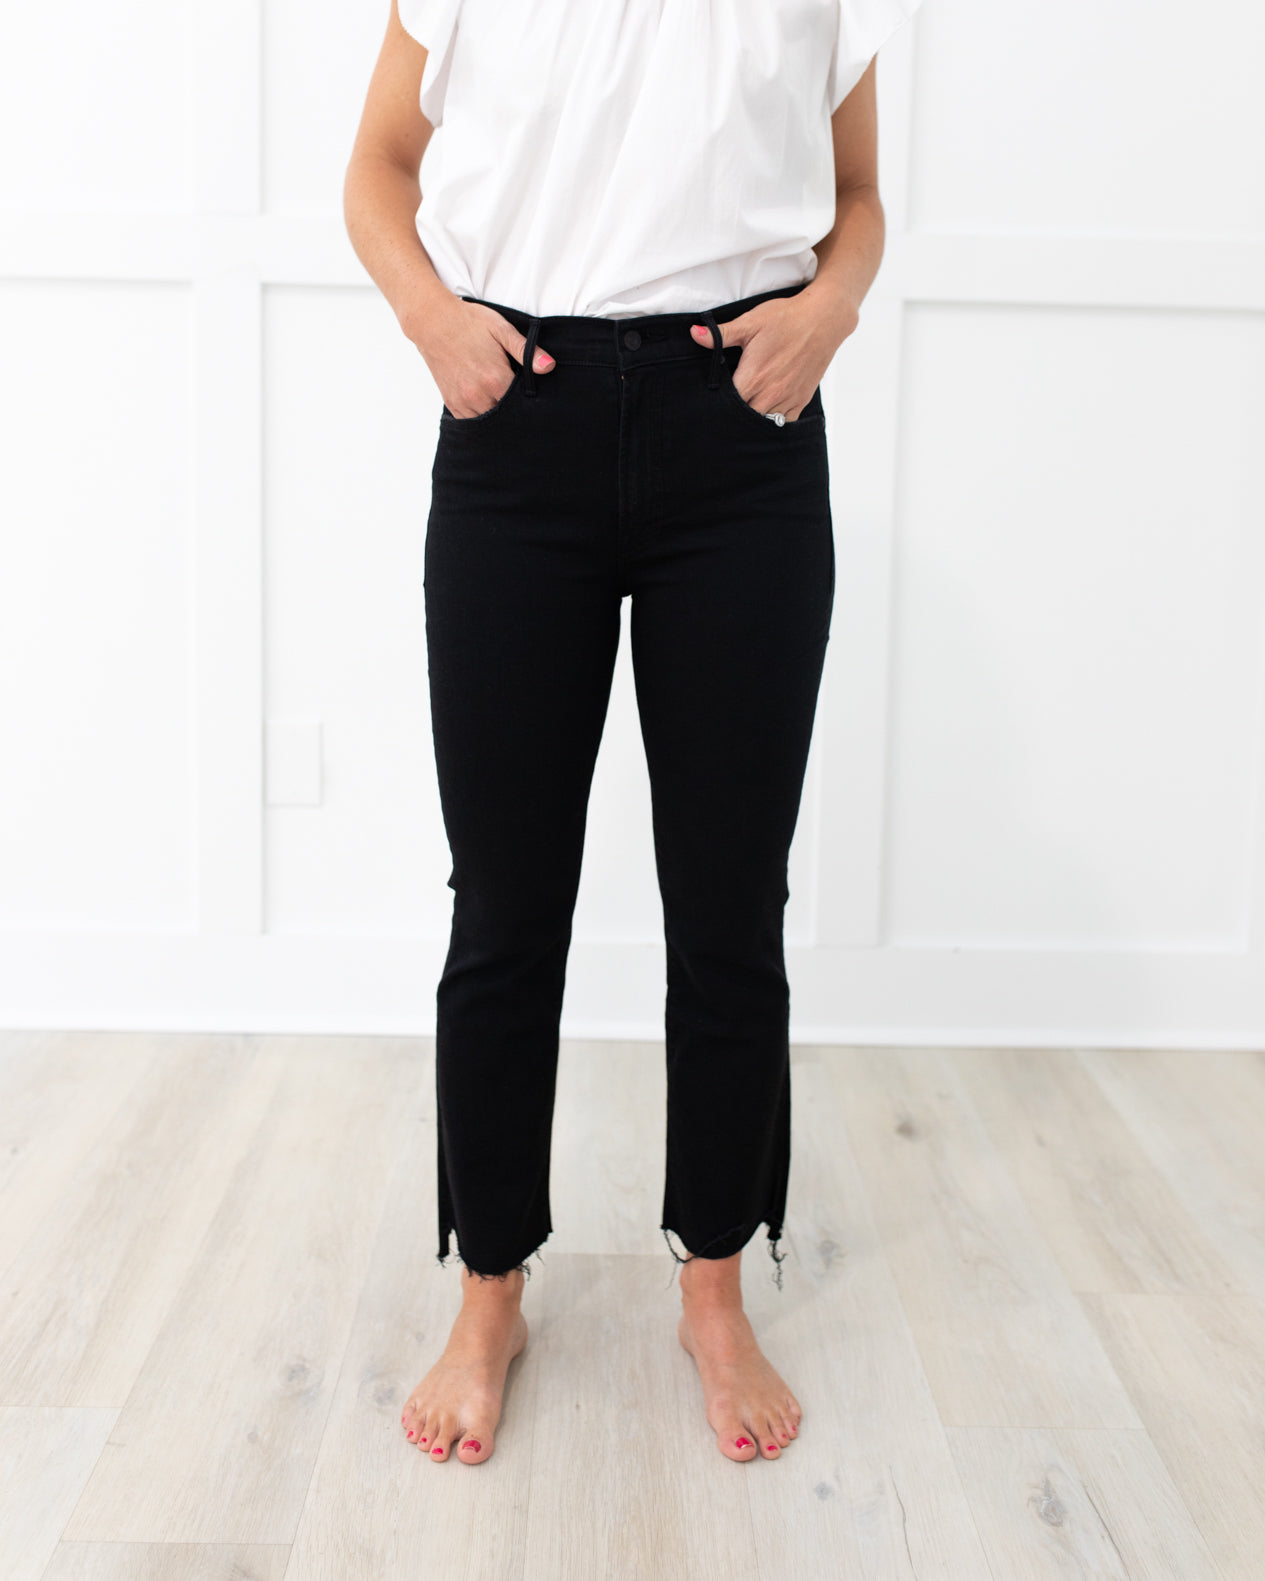 The Insider Crop Step Fray Denim in Not Guilty/Black by Mother